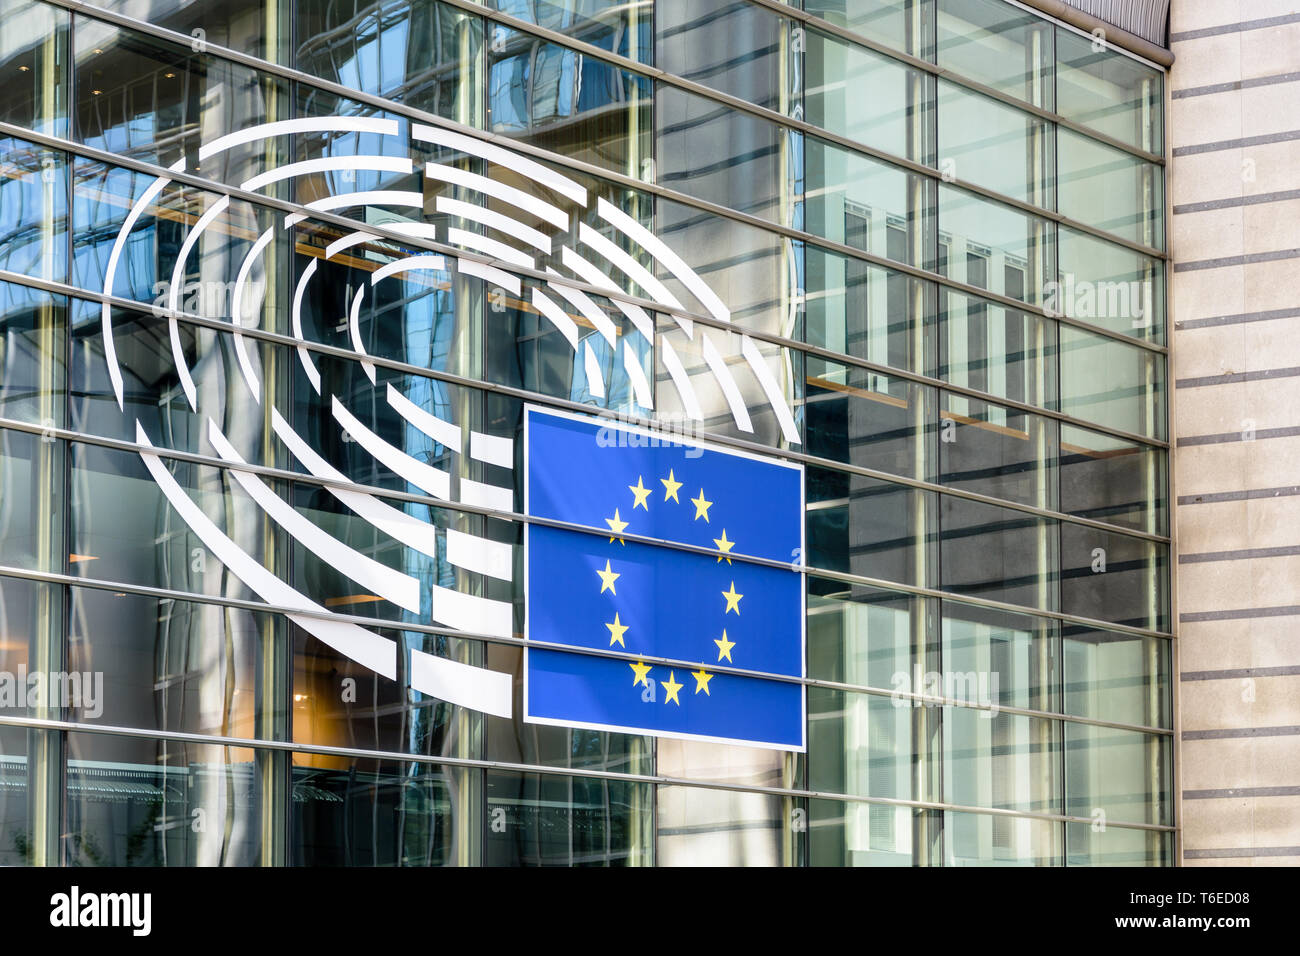 Close-up of the large logo of the European Parliament on the side of the Konstantinos Karamanlis bridge in the Espace Leopold in Brussels, Belgium. Stock Photo